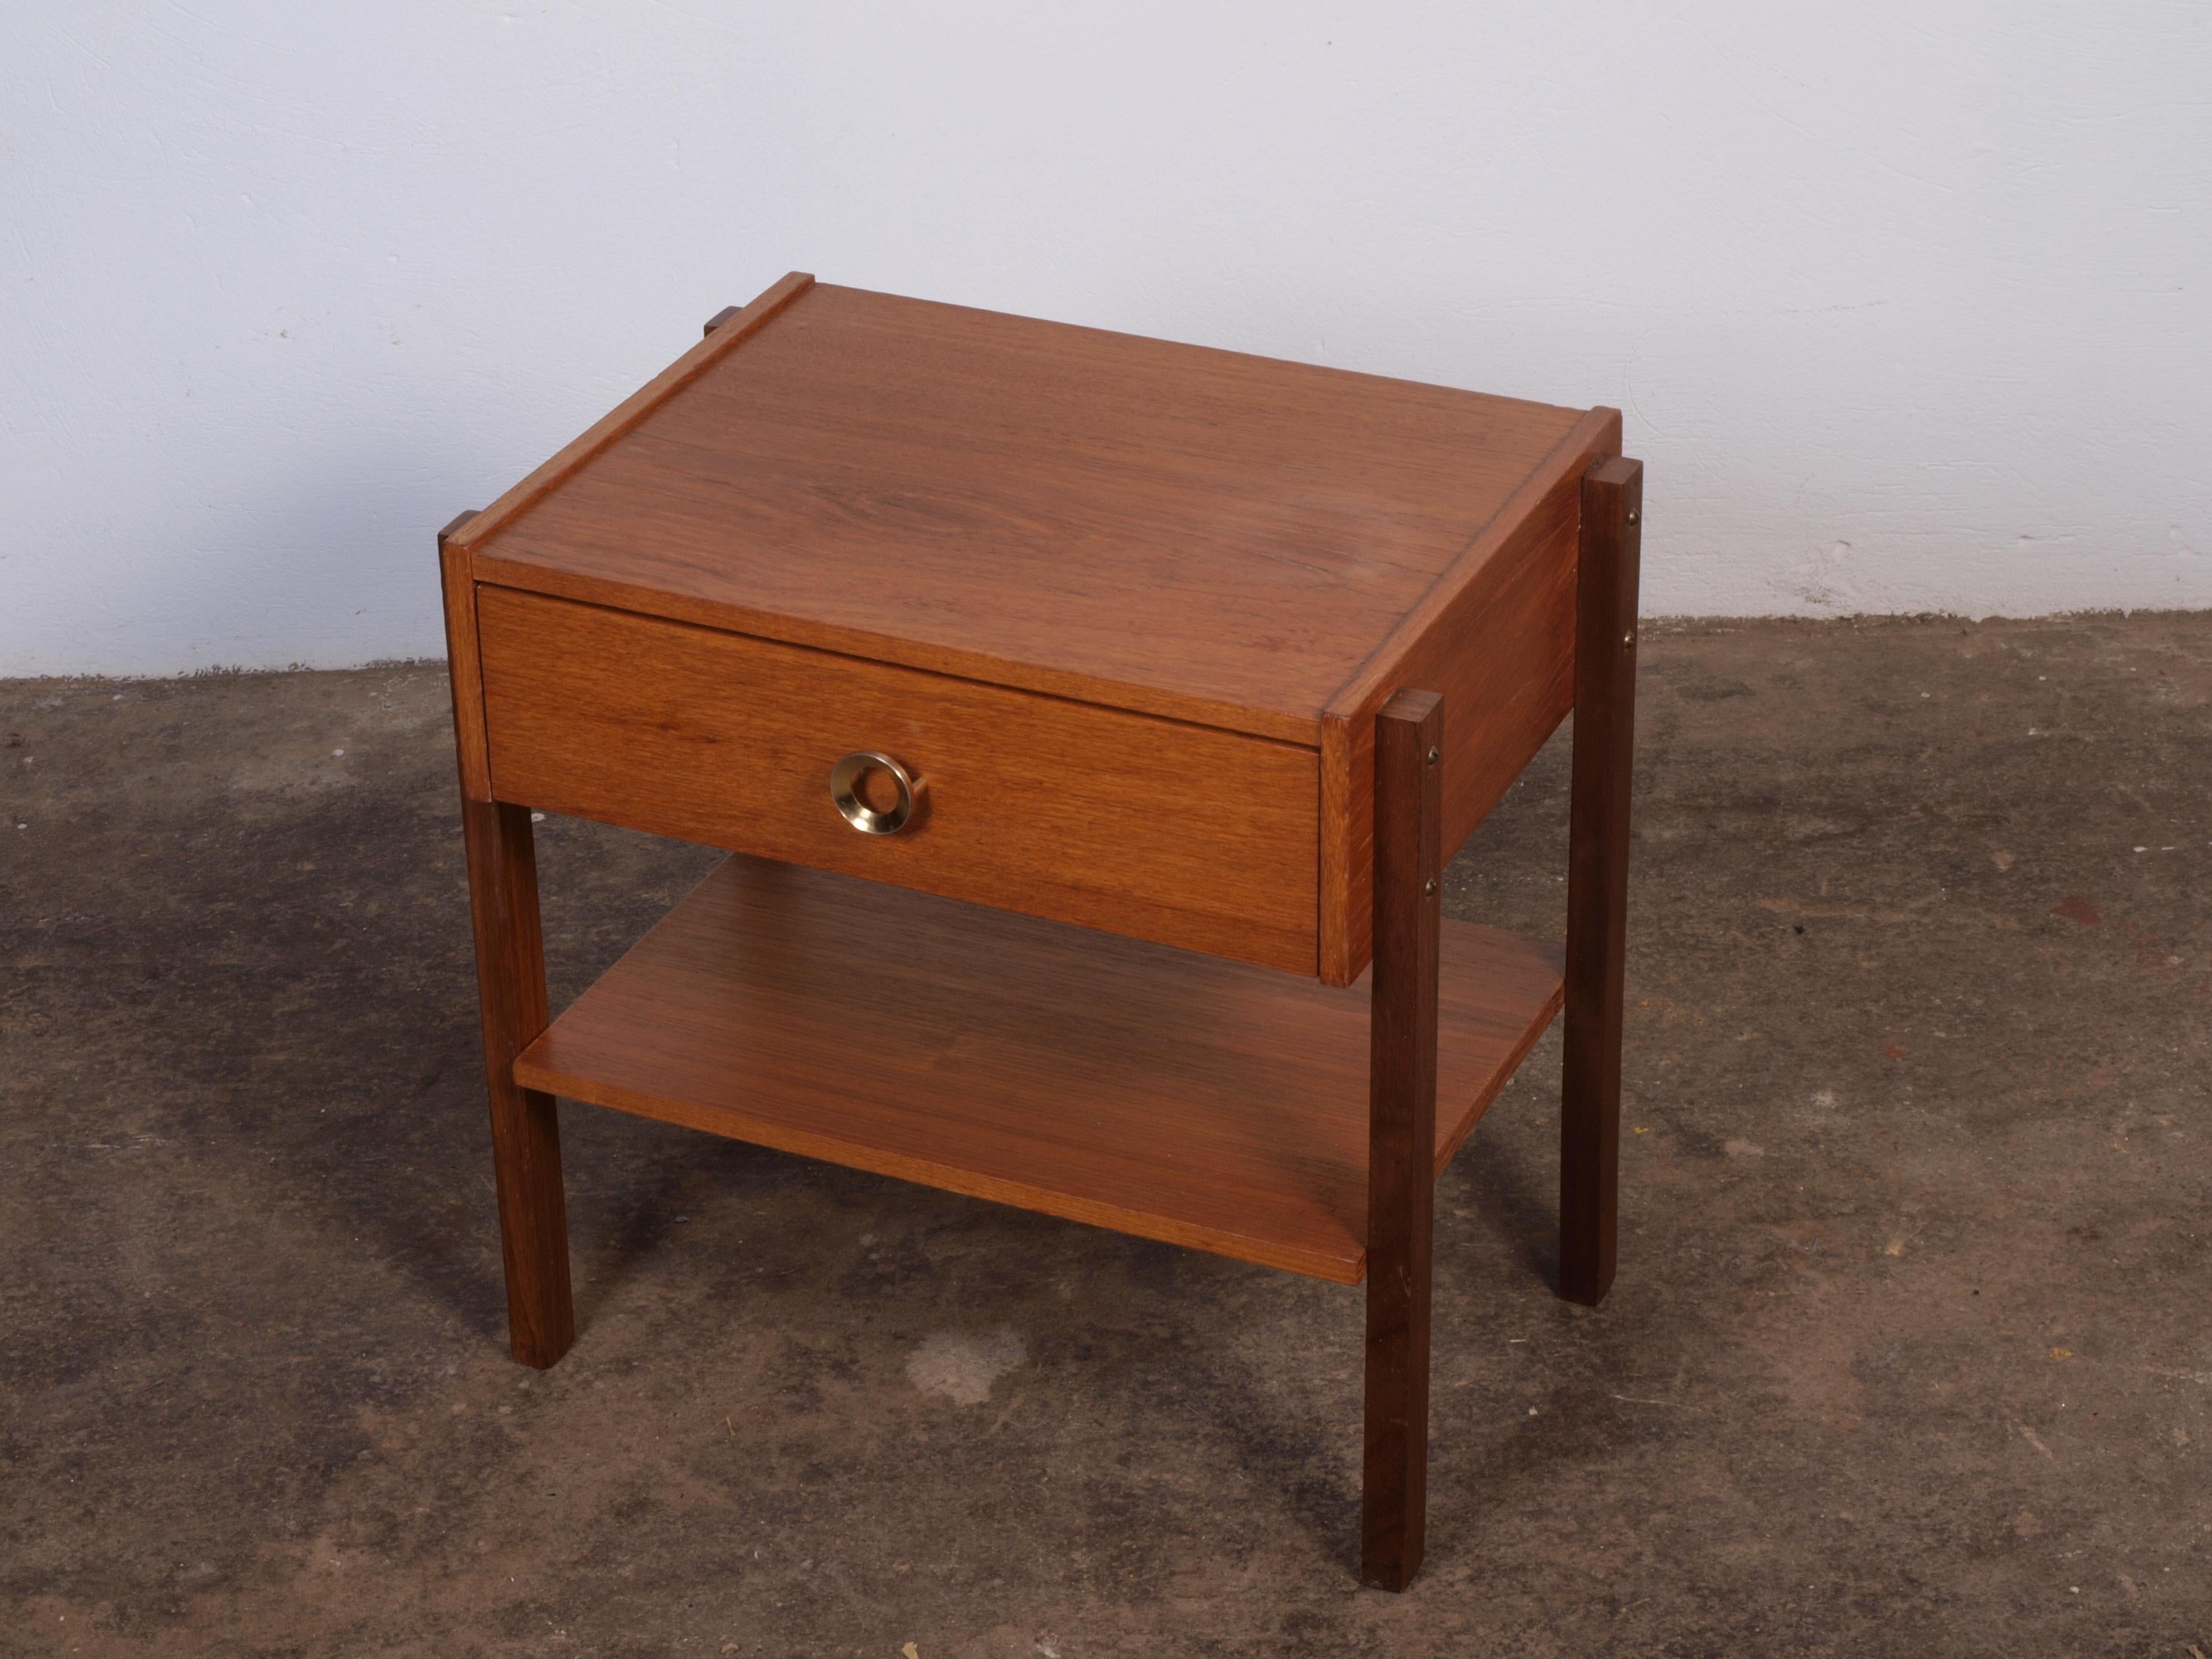 Small, elegant bedside table with drawer in teak wood. Stands sturdy and solid with minor signs of use. No ugly dents, scratches, or marks. The drawer slides smoothly. Would beautifully complement the modern home and decor.